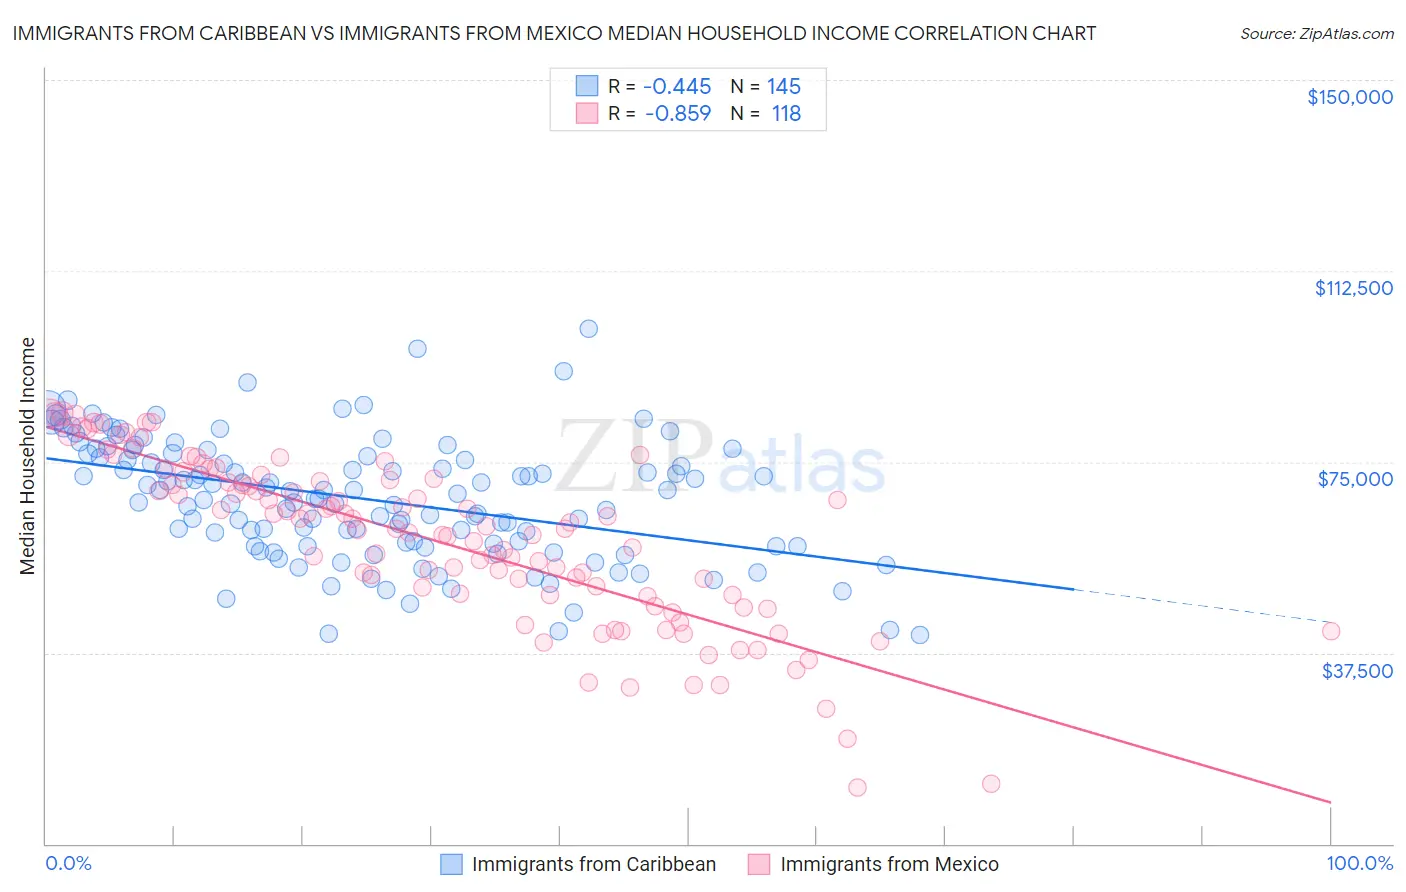 Immigrants from Caribbean vs Immigrants from Mexico Median Household Income